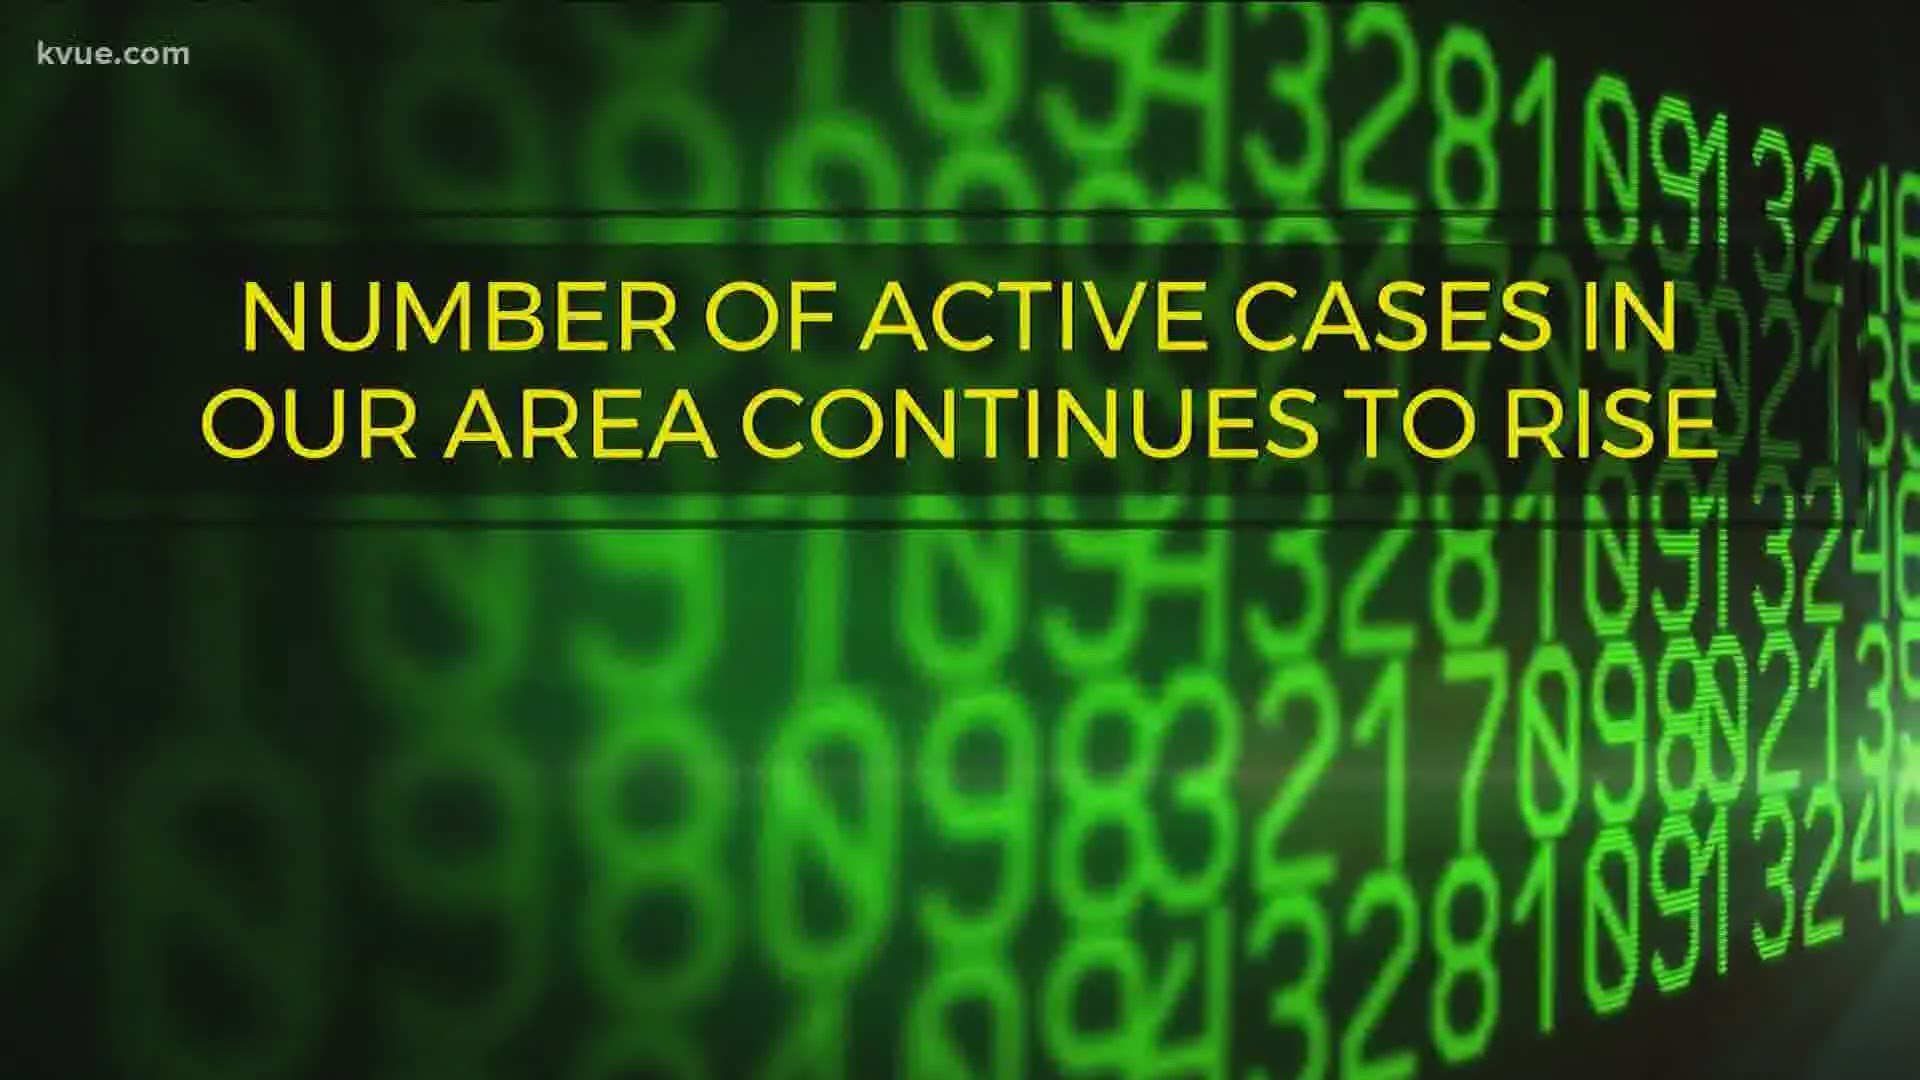 Since we last analyzed date from one week ago, the number of active cases in the KVUE viewing area continues to rise. Bob Buckalew breaks down the numbers.